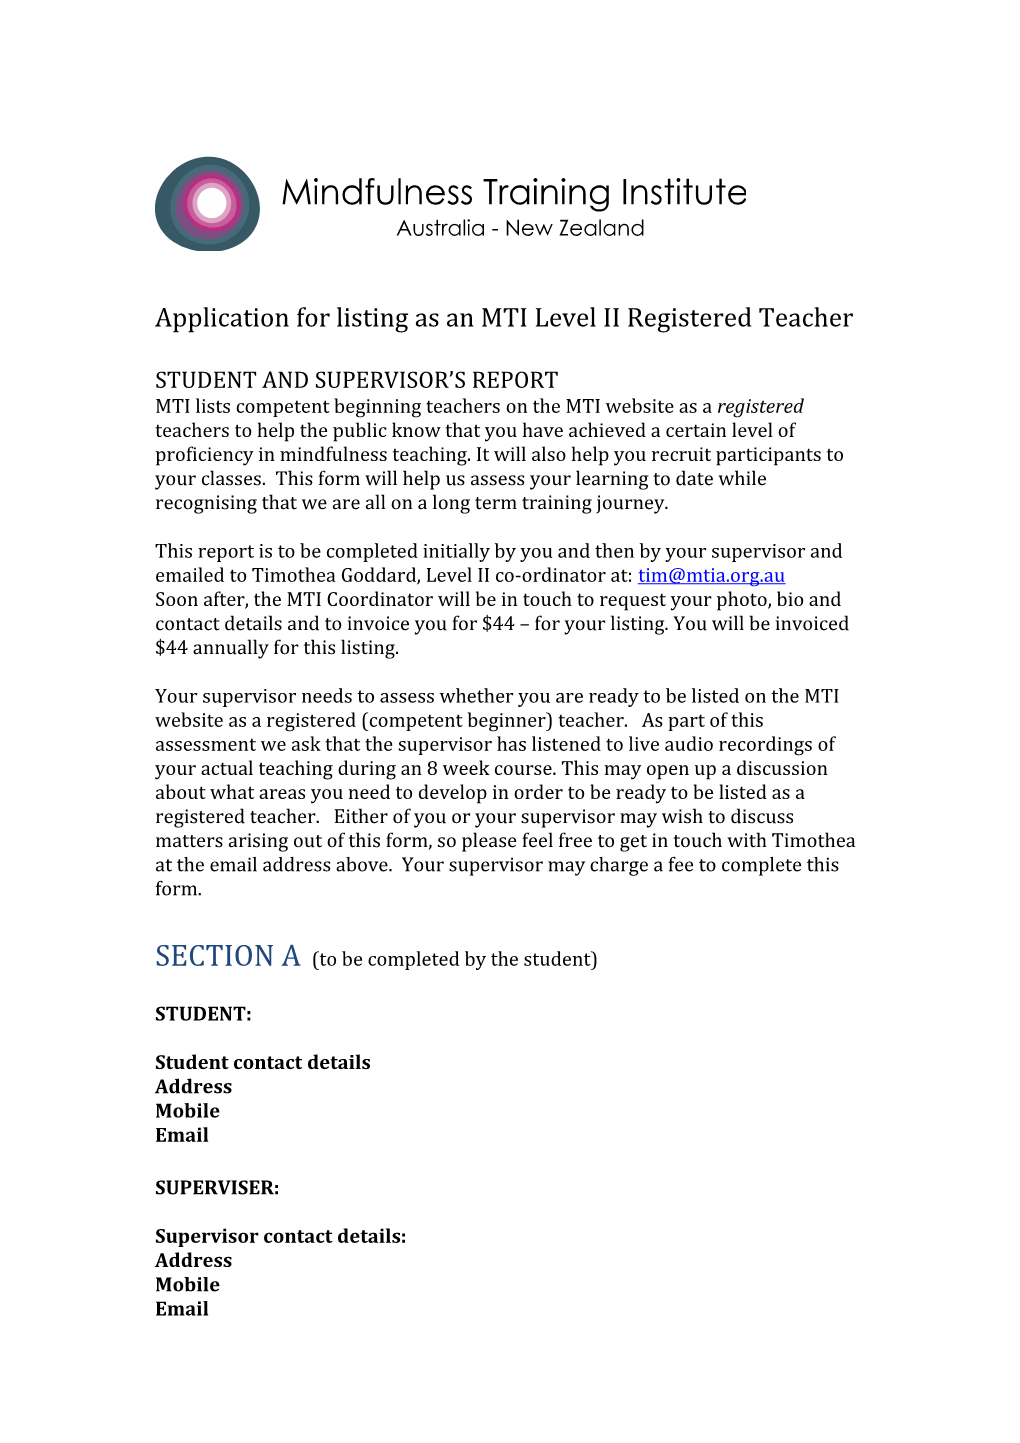 Application for Listing As an MTI Level II Registered Teacher